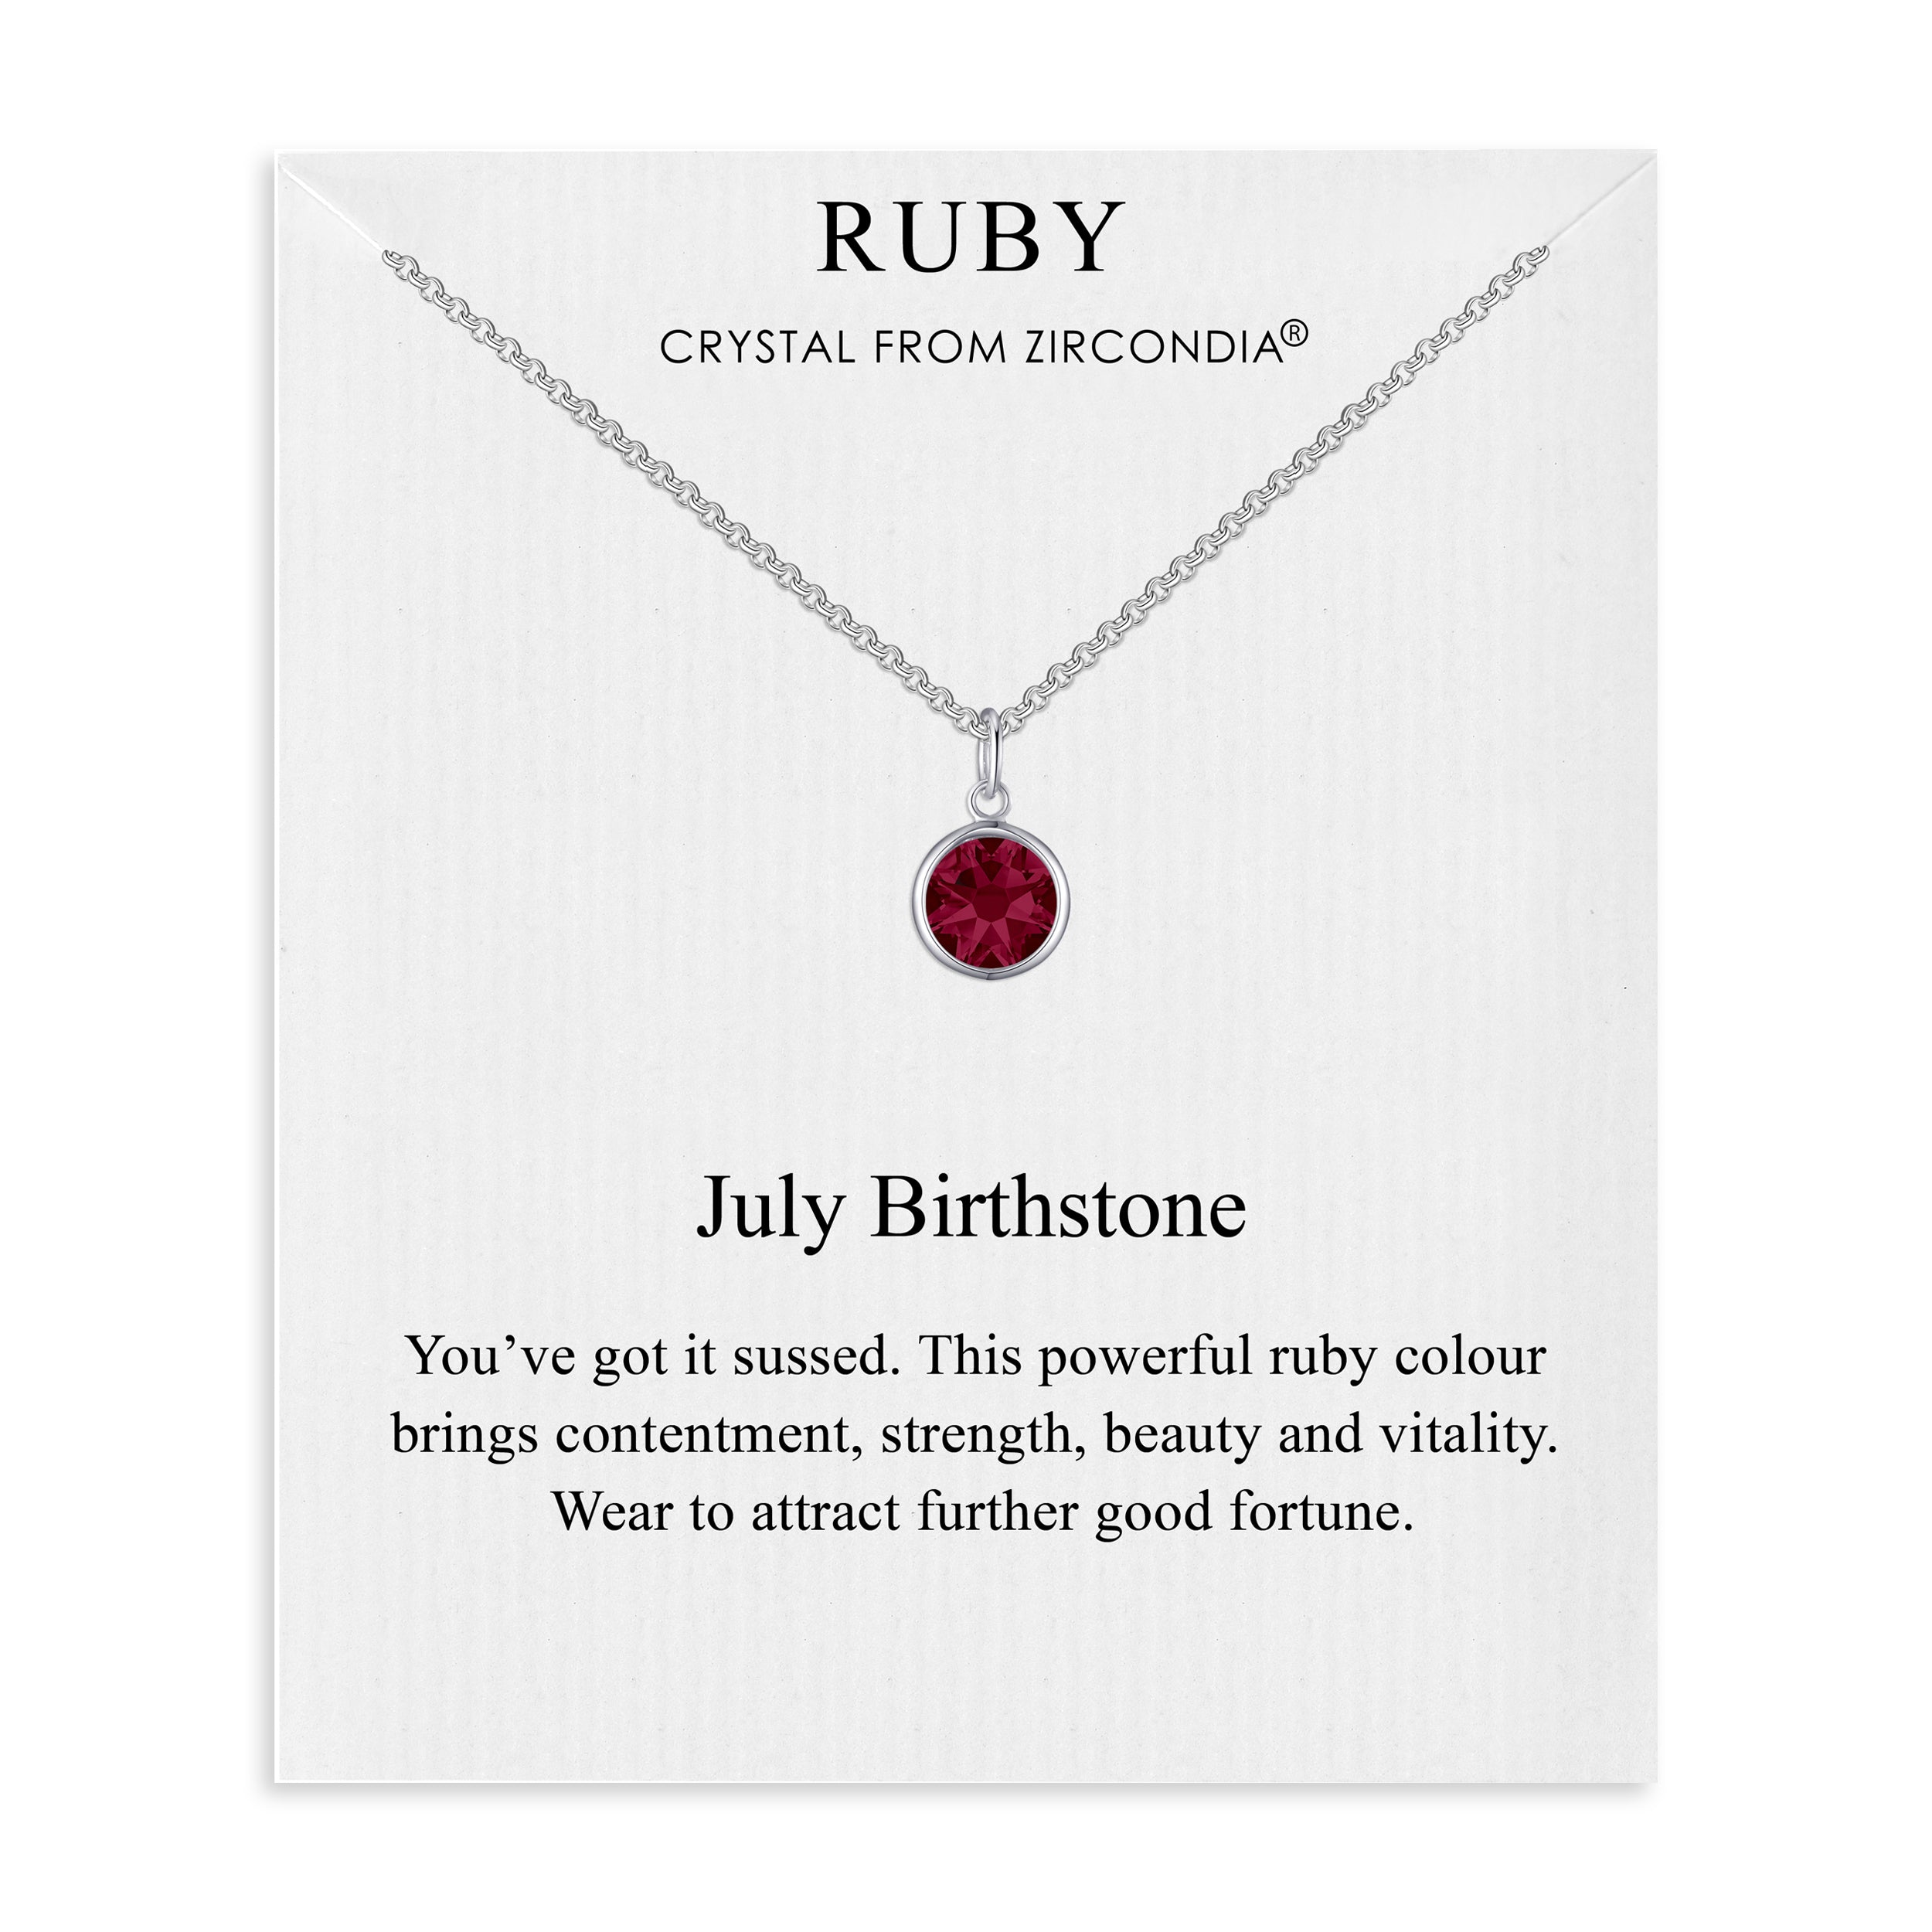 July (Ruby) Birthstone Necklace Created with Zircondia® Crystals by Philip Jones Jewellery